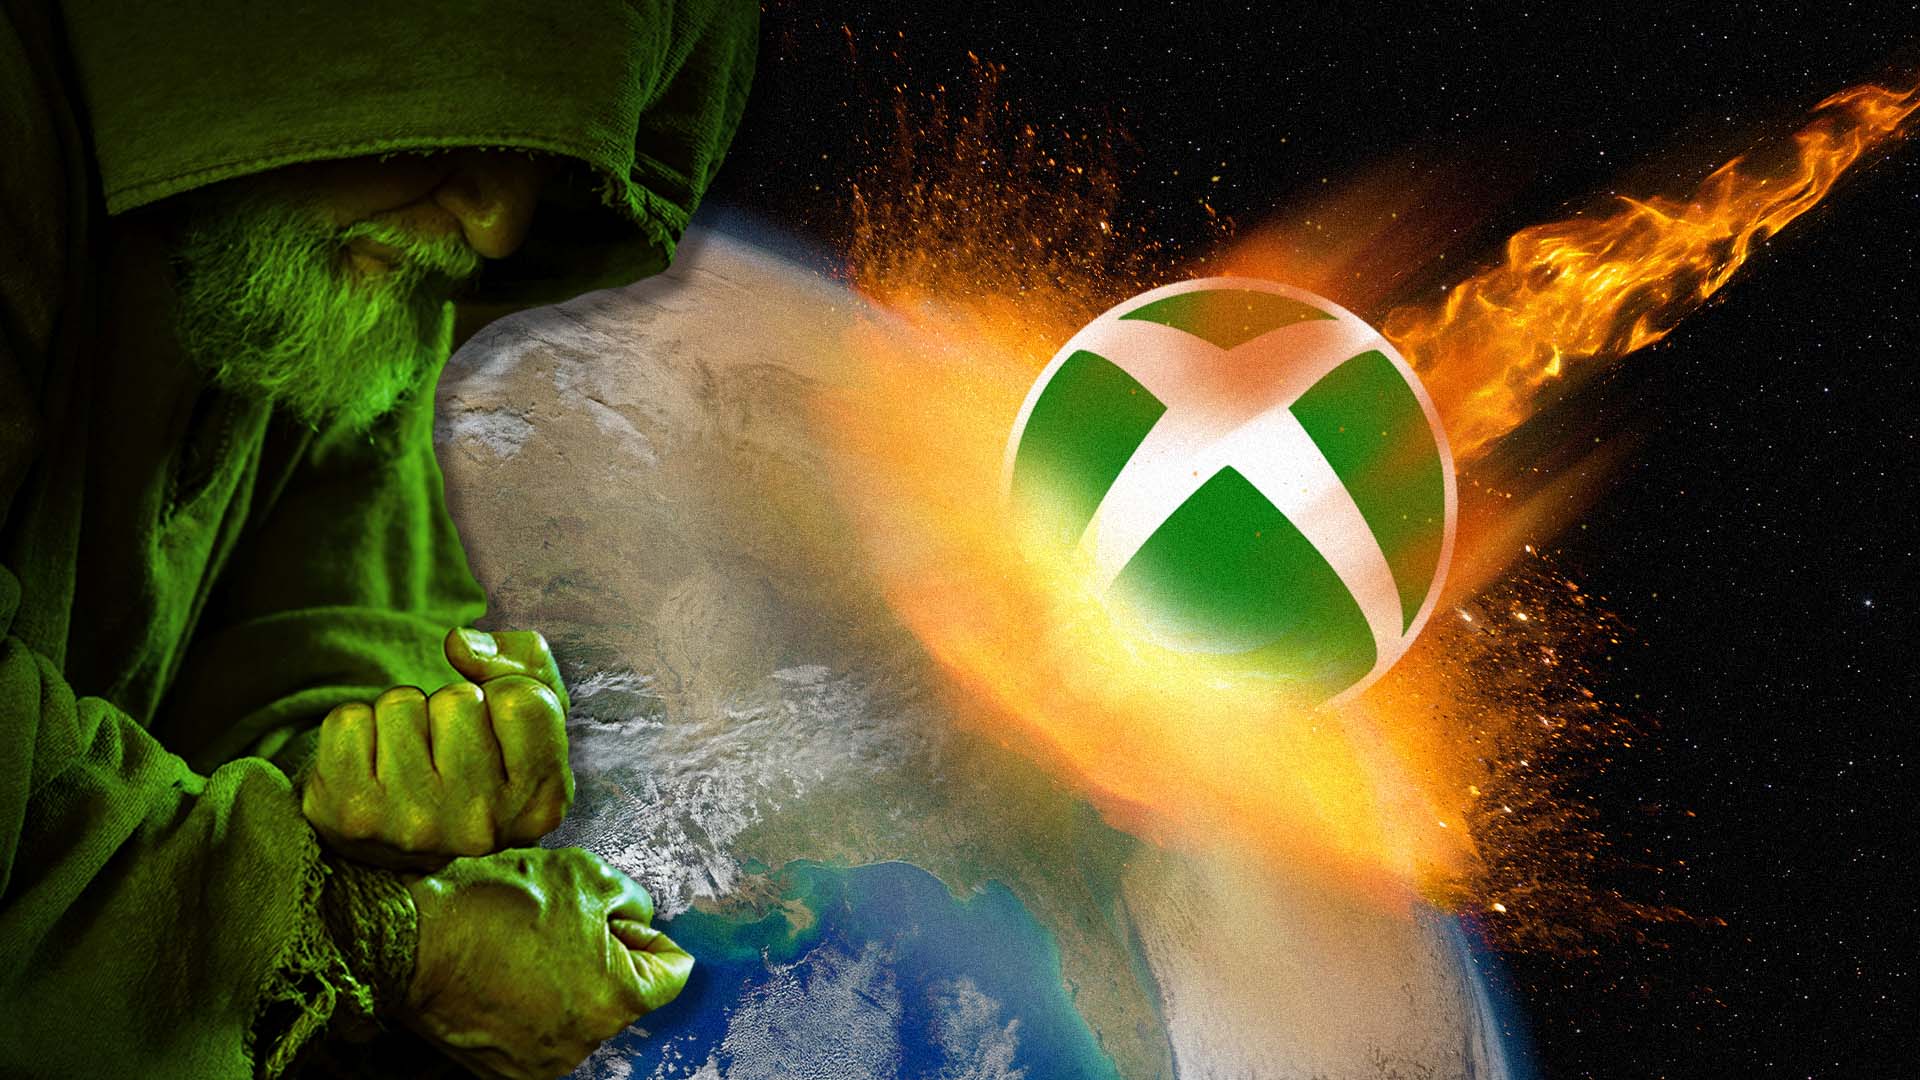 One image shows a monk praying as a large Xbox logo crashes into Earth. 